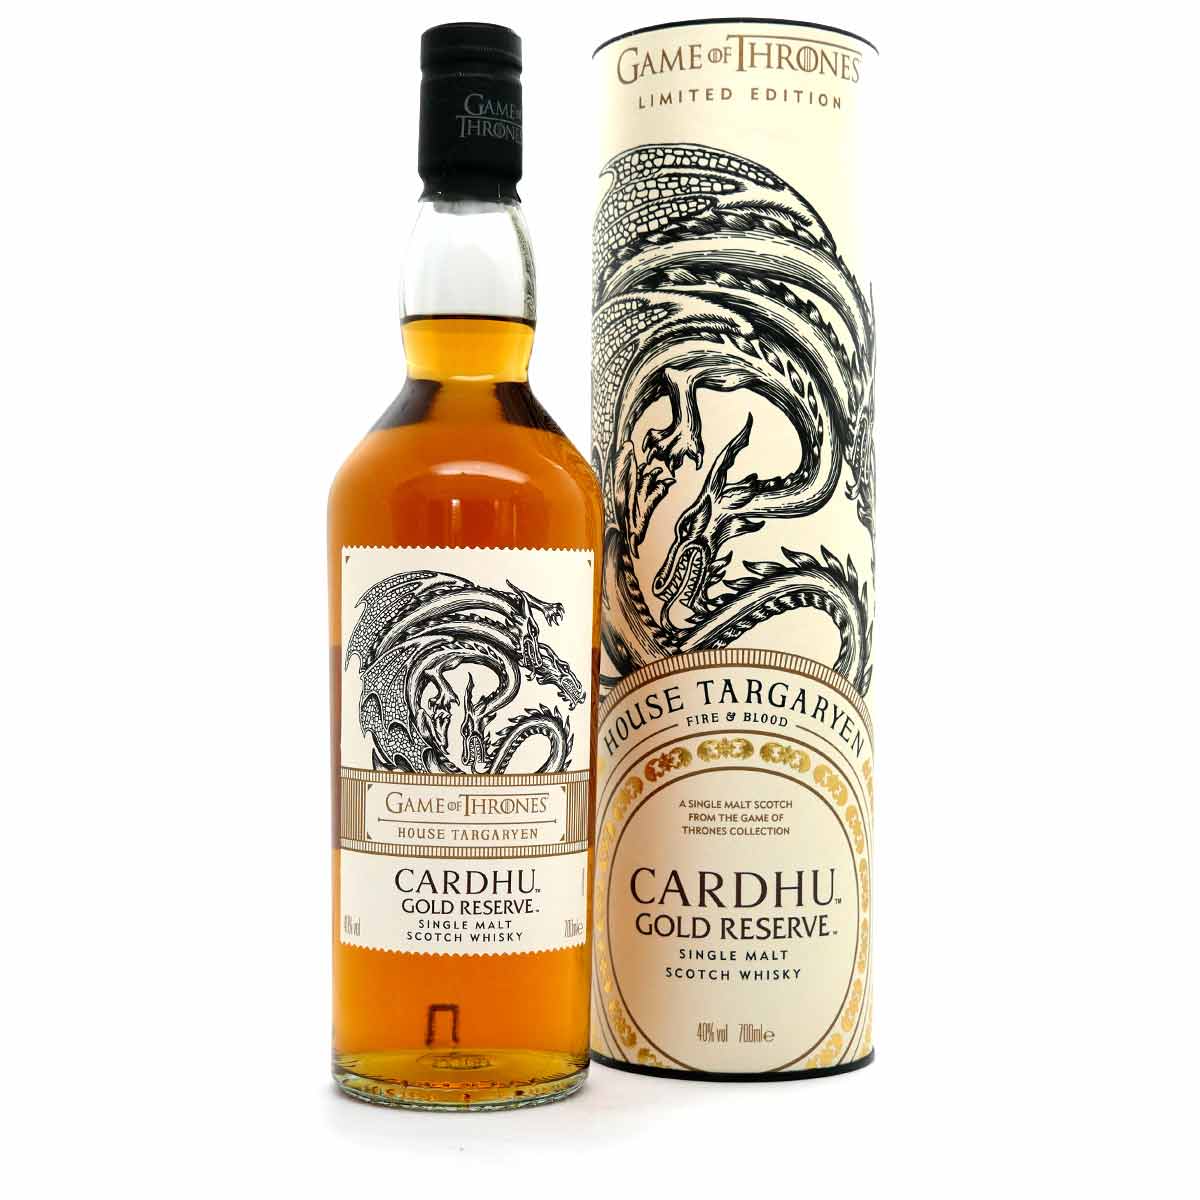 Cardhu Gold Reserve | Game of Thrones